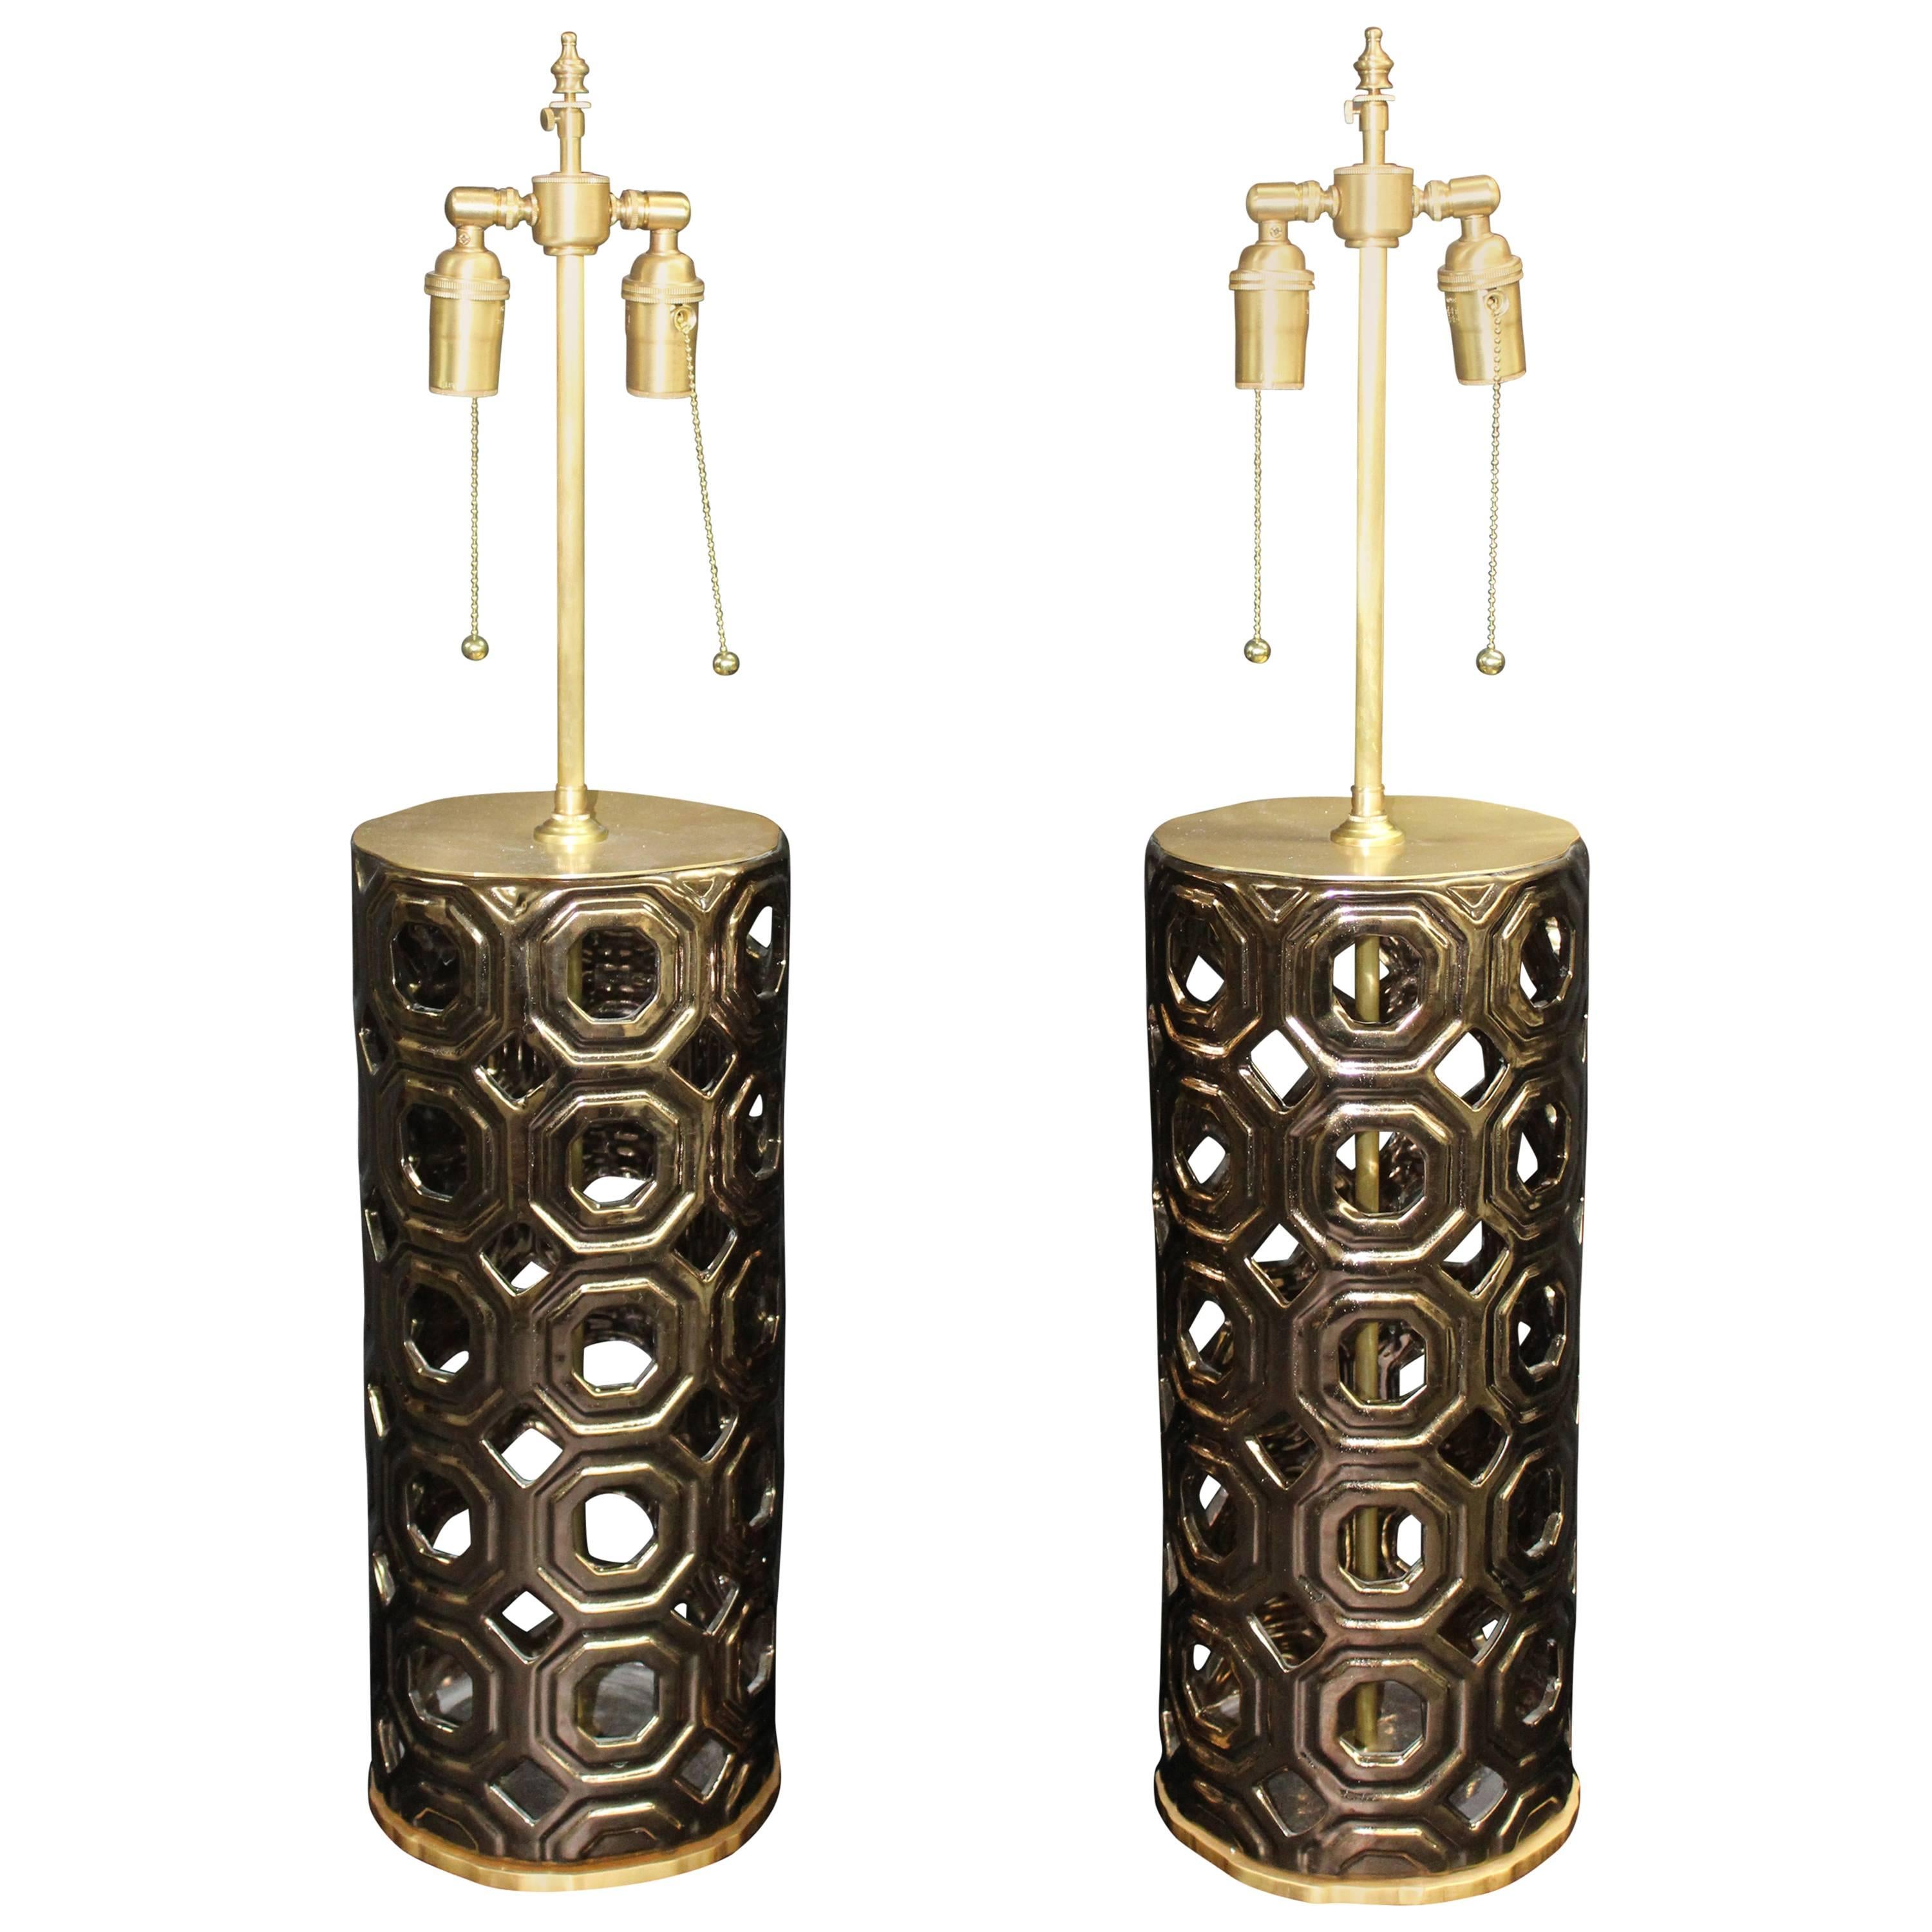 Elegant Bronze Ceramic Vessels with Lamp Application with Brushed Brass Hardware